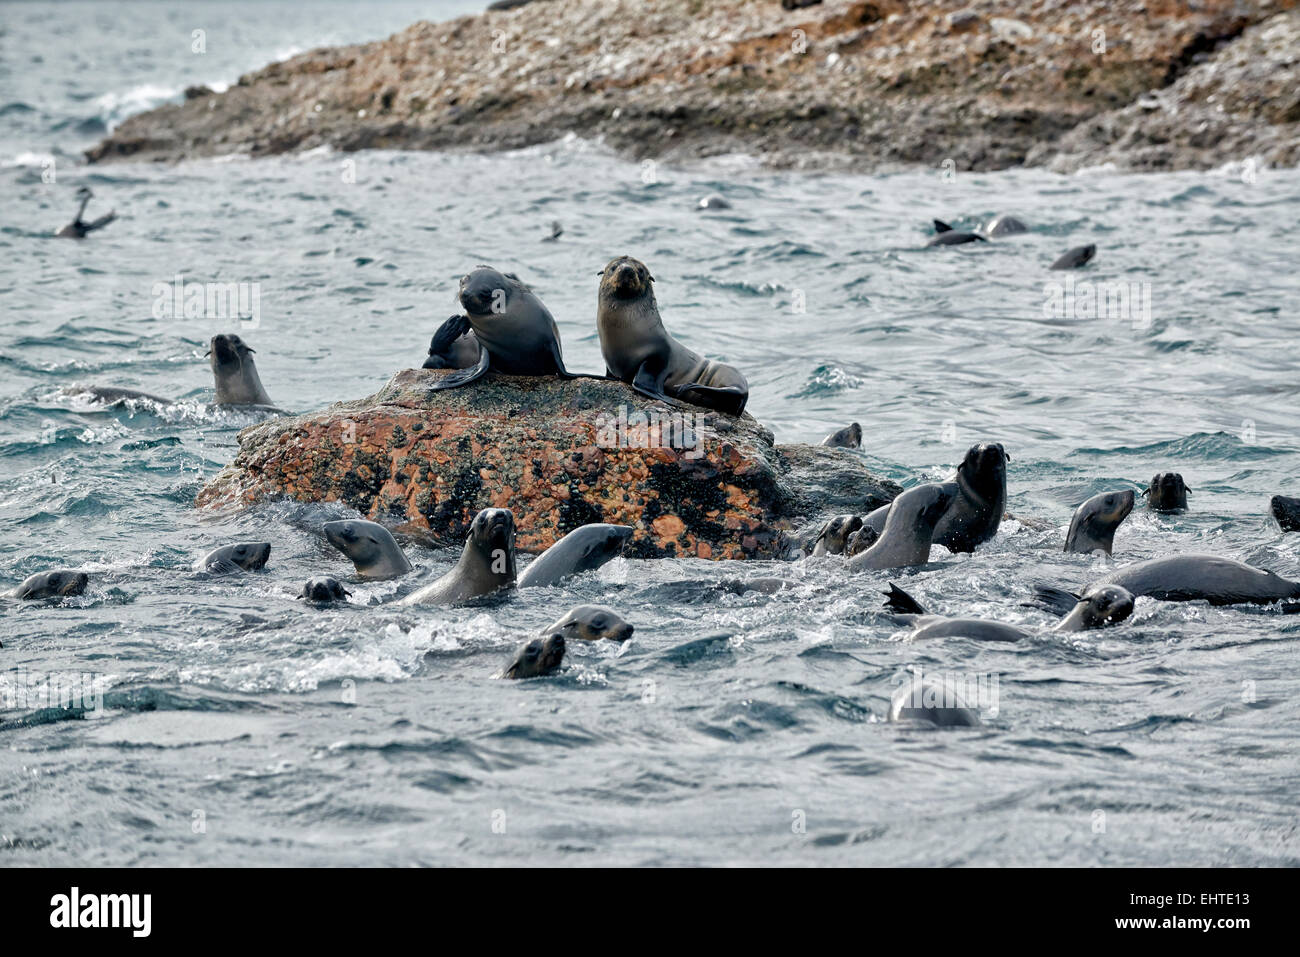 Colony of brown fur seal (Arctocephalus pusillus) in front of Mossel Bay, Western Cape, South Africa Stock Photo